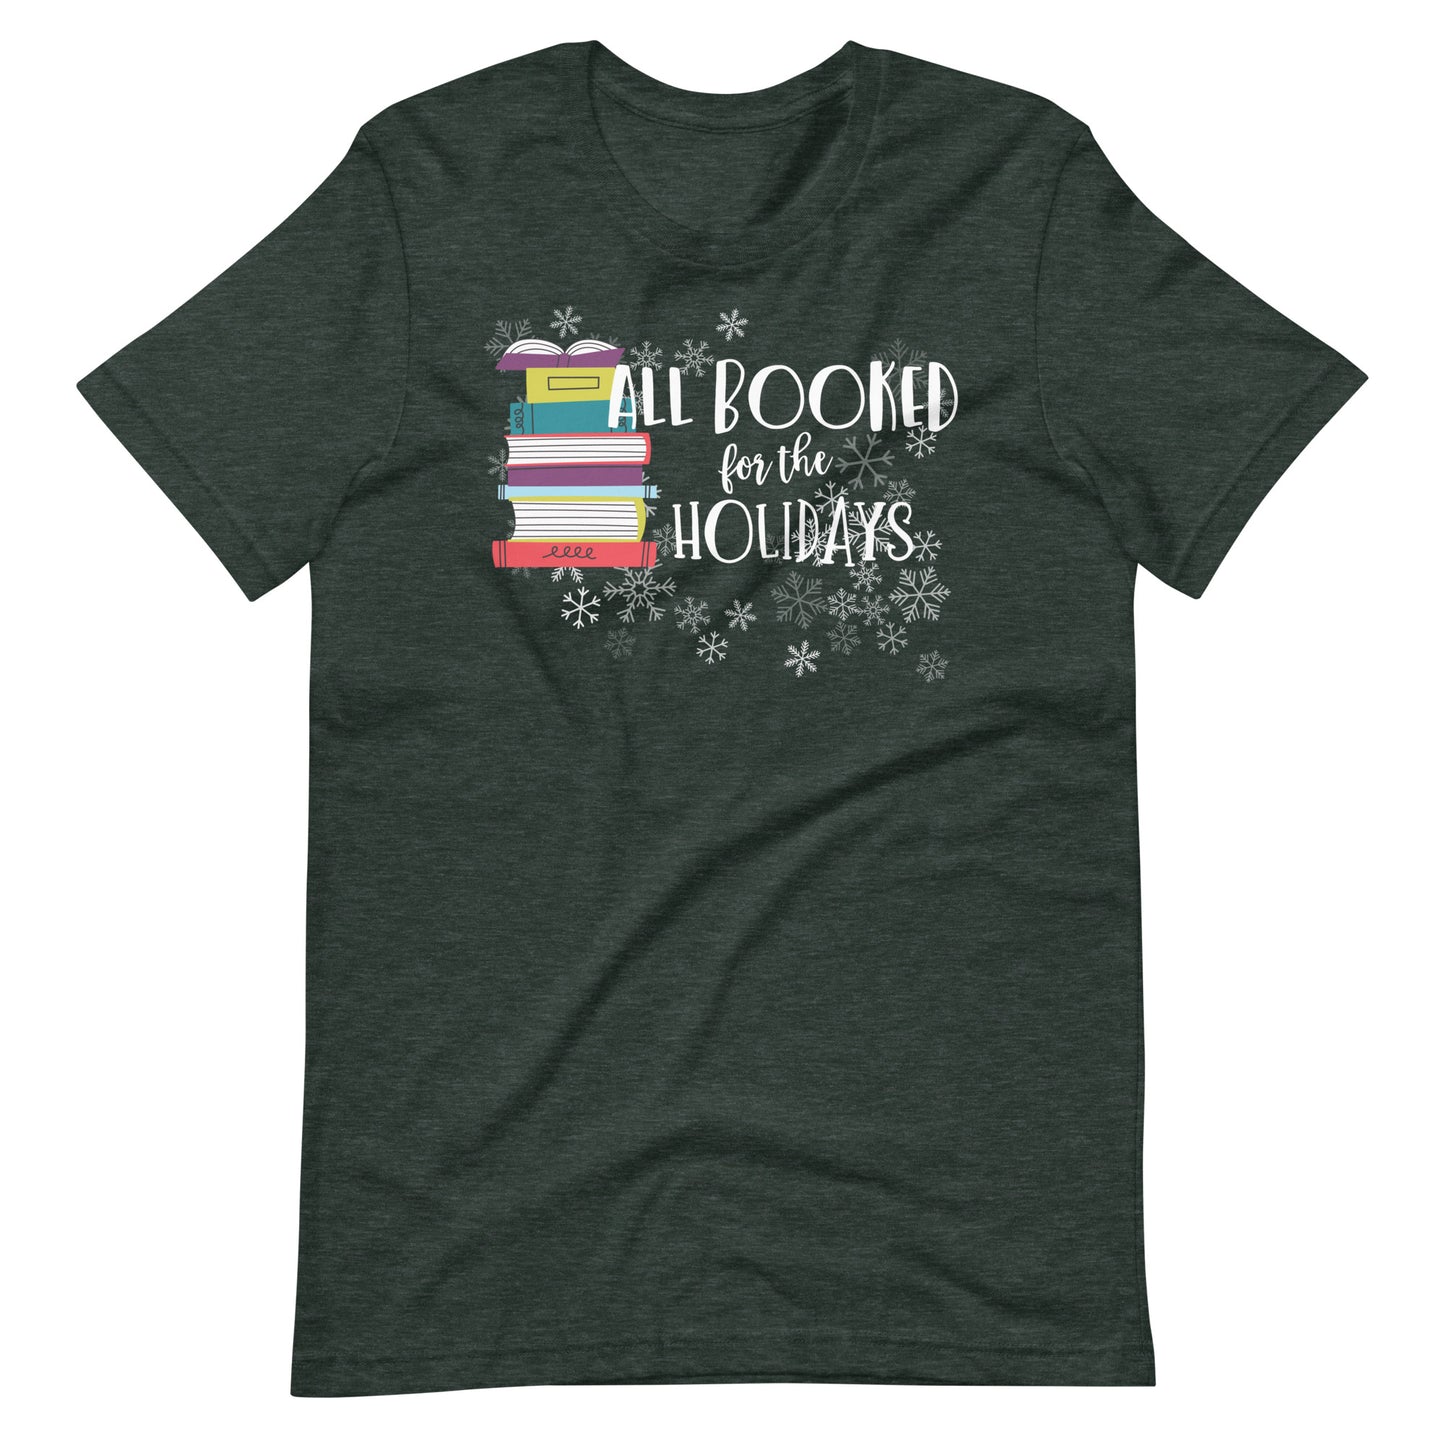 All Booked For the Holidays Christmas Short Sleeve T-shirt